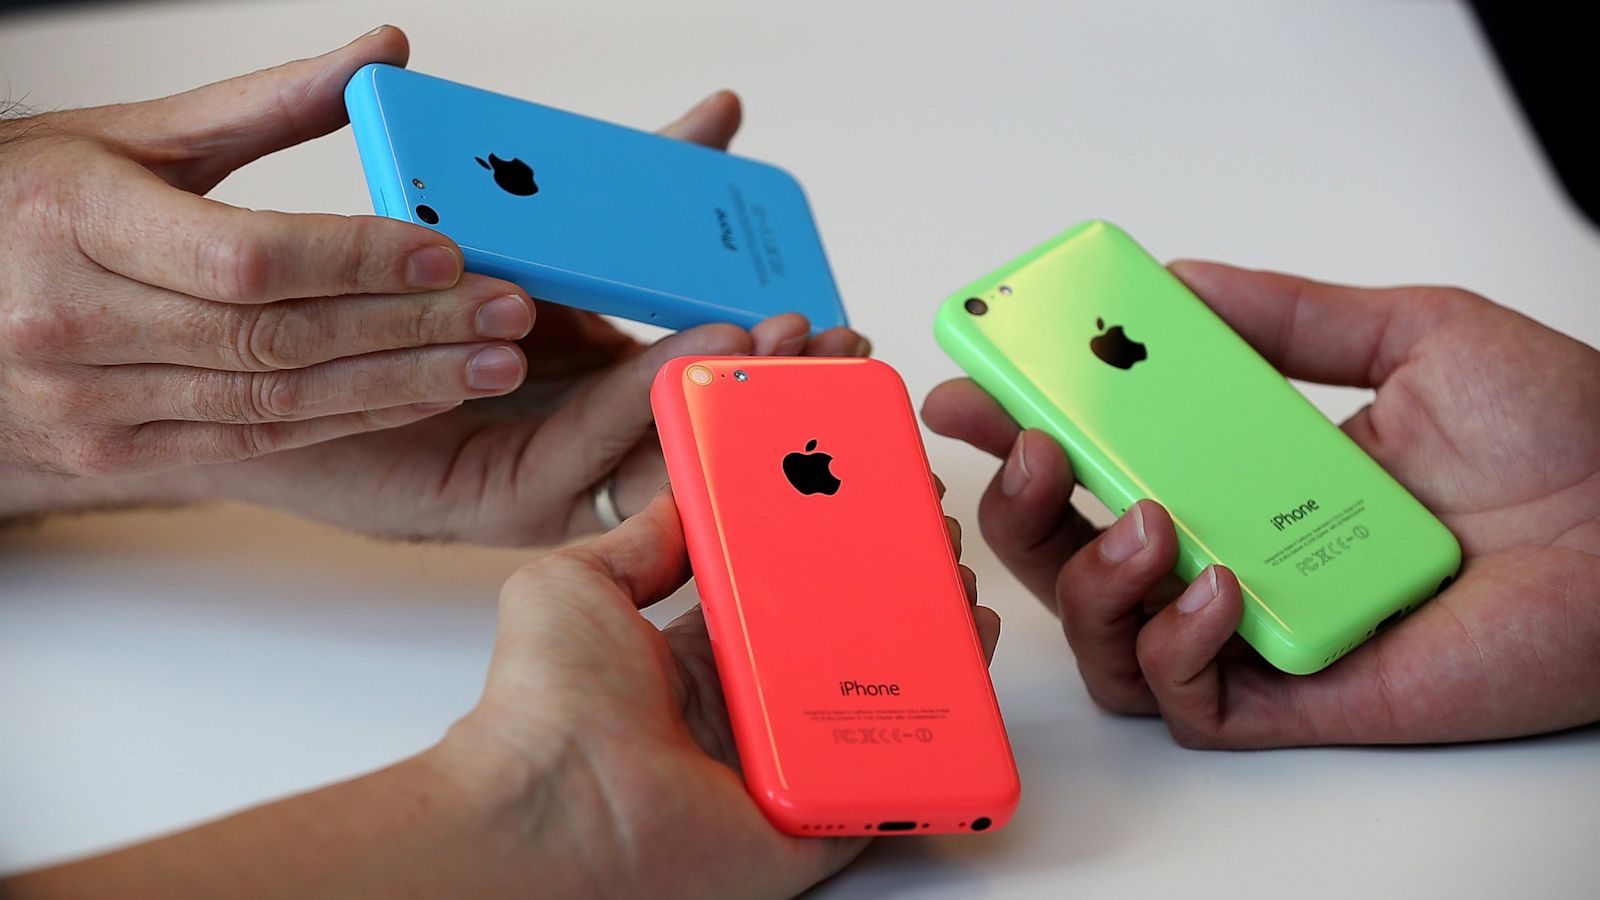 Two Launch, Walmart Drops Price of the iPhone 5c to After Best Buy's Offer - ABC News